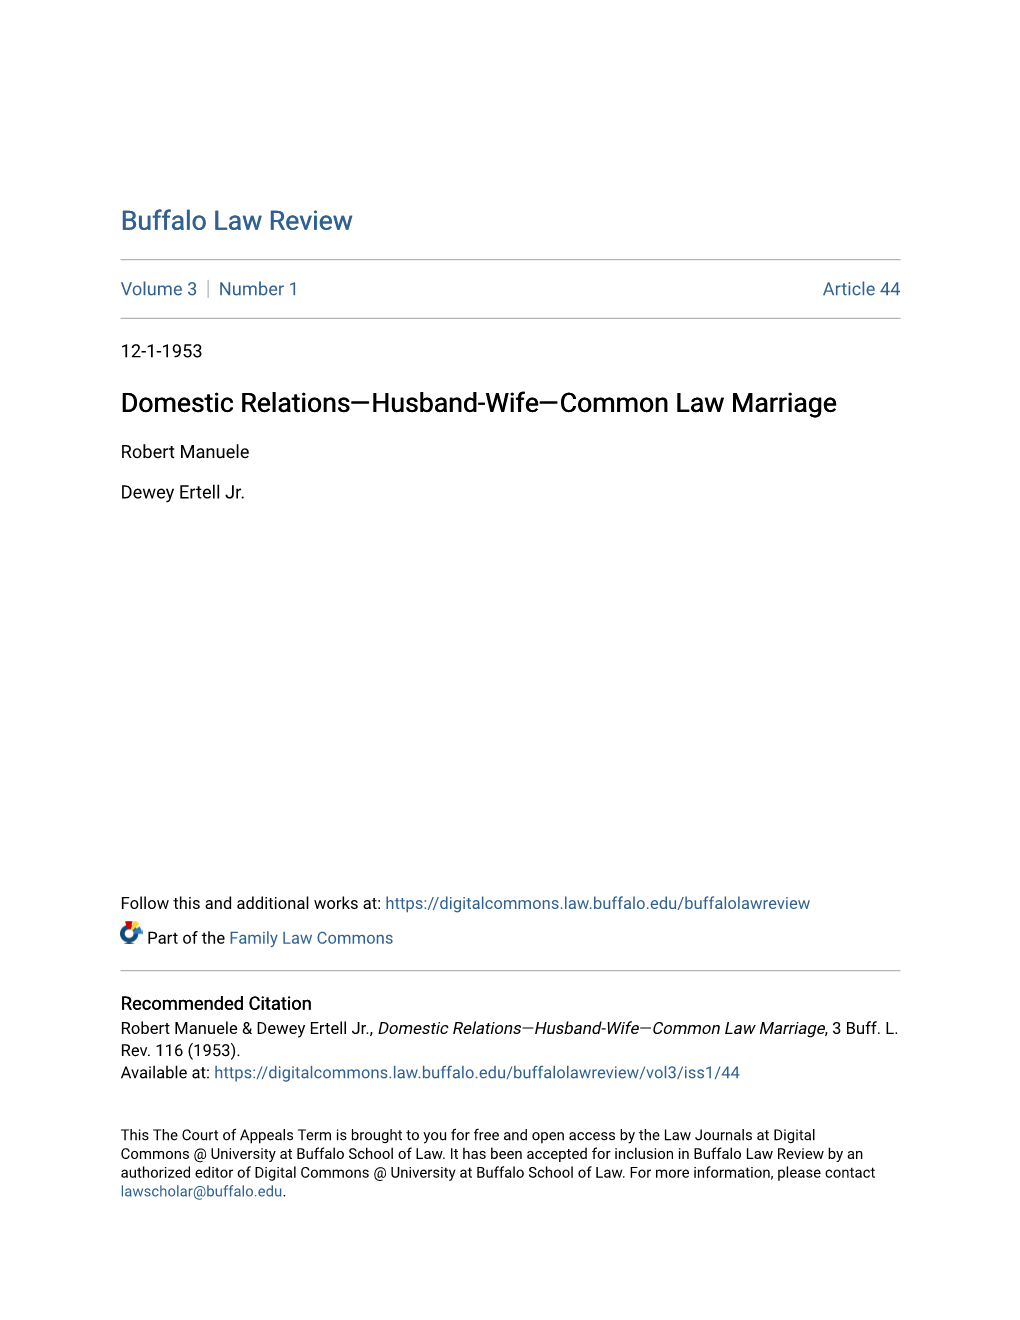 Domestic Relations—Husband-Wife—Common Law Marriage